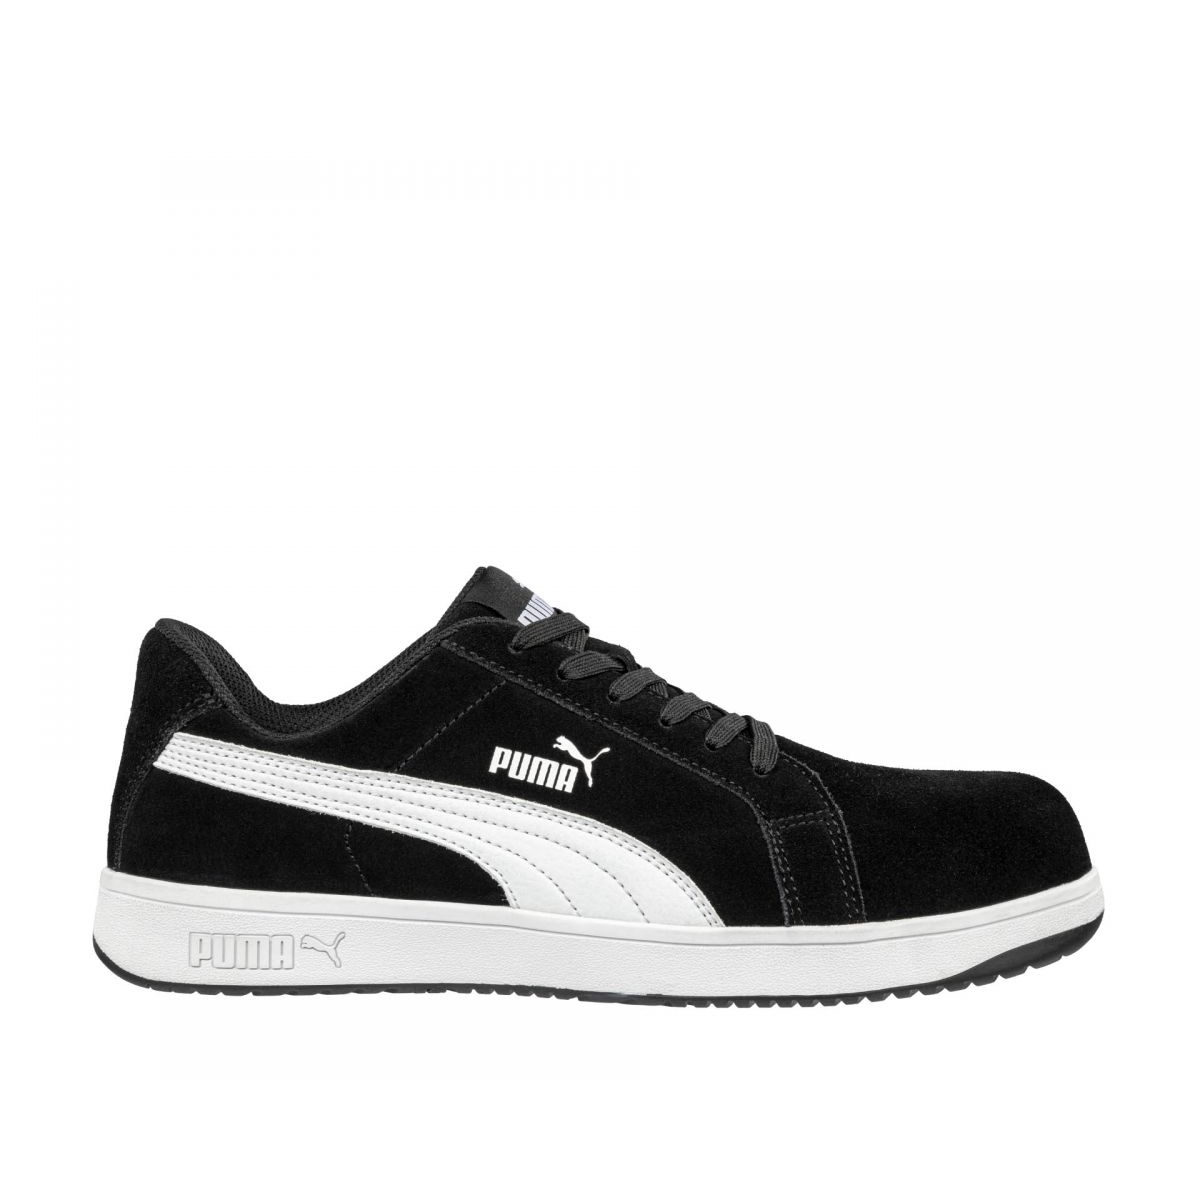 PUMA Safety Women's Iconic Low Composite Toe EH Work Shoes Black Suede - 640115 BLACK - BLACK, 9